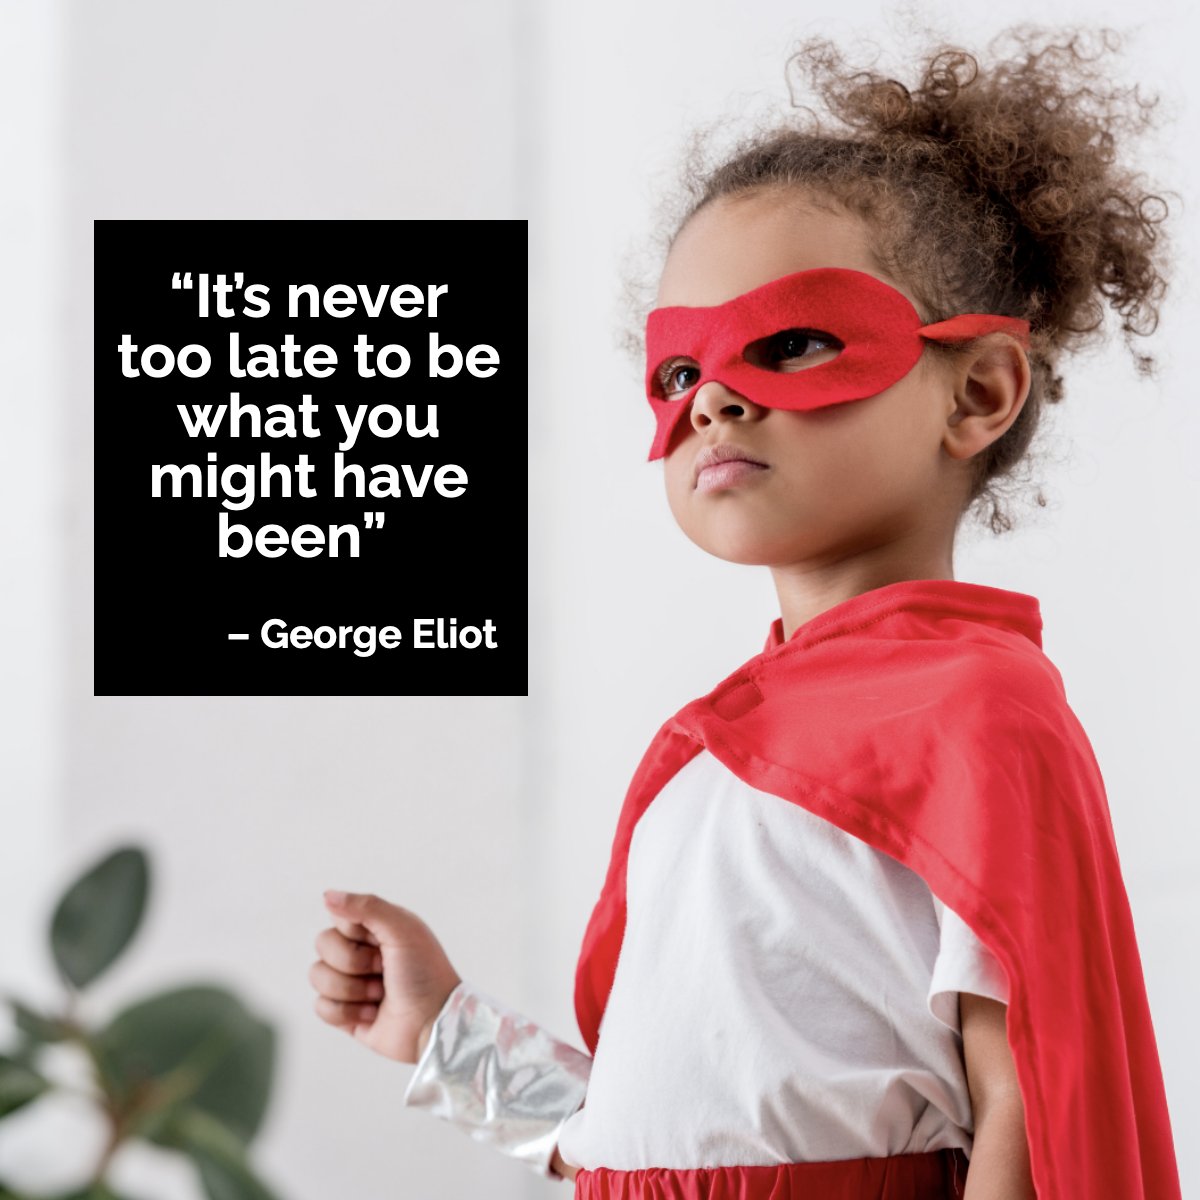 'It's never too late to be what you might have been'

#inspiring #inspirational #quote #quoteoftheday✏️ #quotestagram
 #veteranhomebuyers #militaryhomebuyers #veteransellinghome #militarysellinghome #PCSmove #militaryPCS #veteranrealtor #militaryrealtor